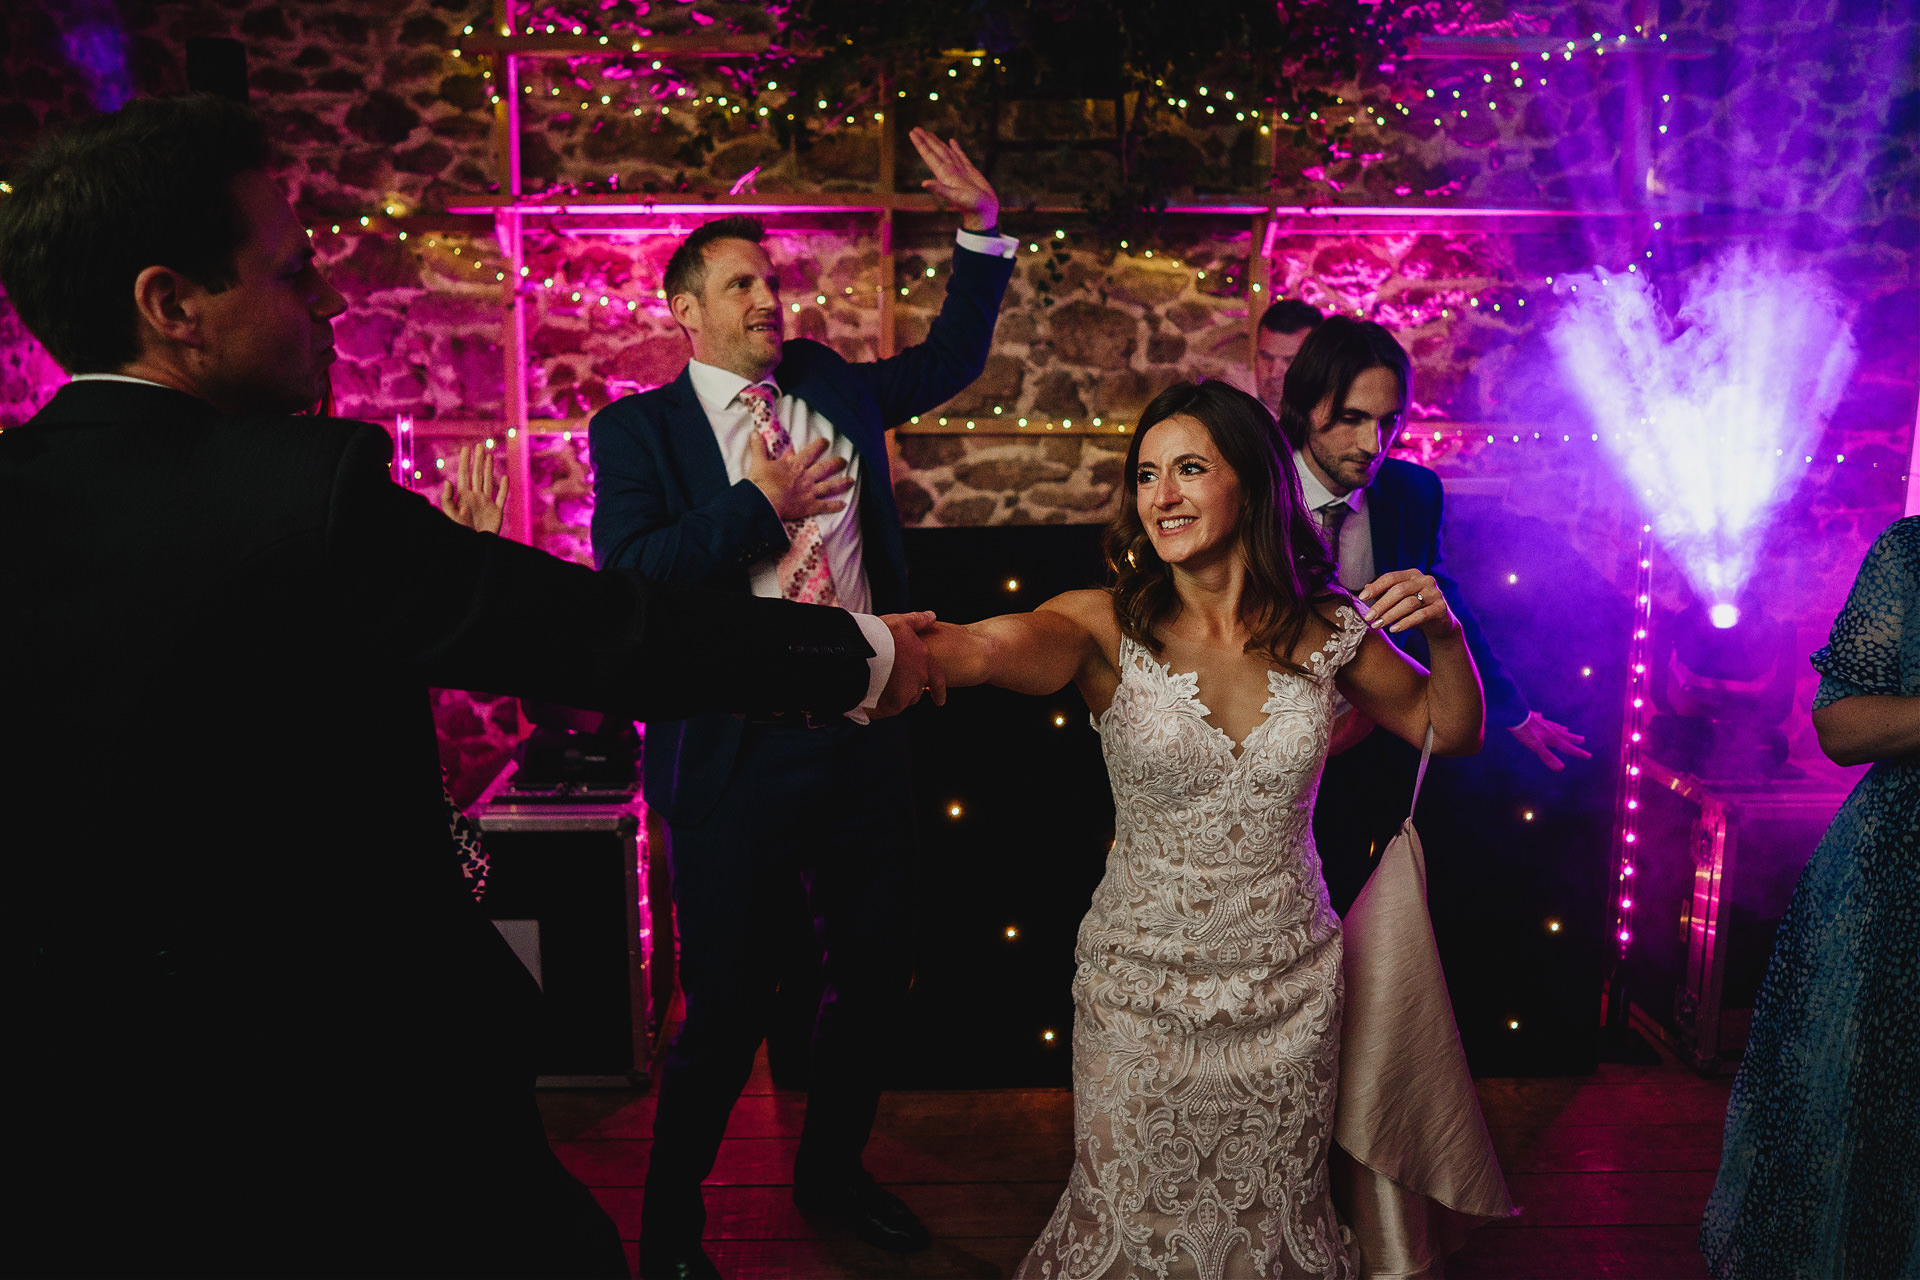 Bride and groom dancing together in amazing lit wedding barn